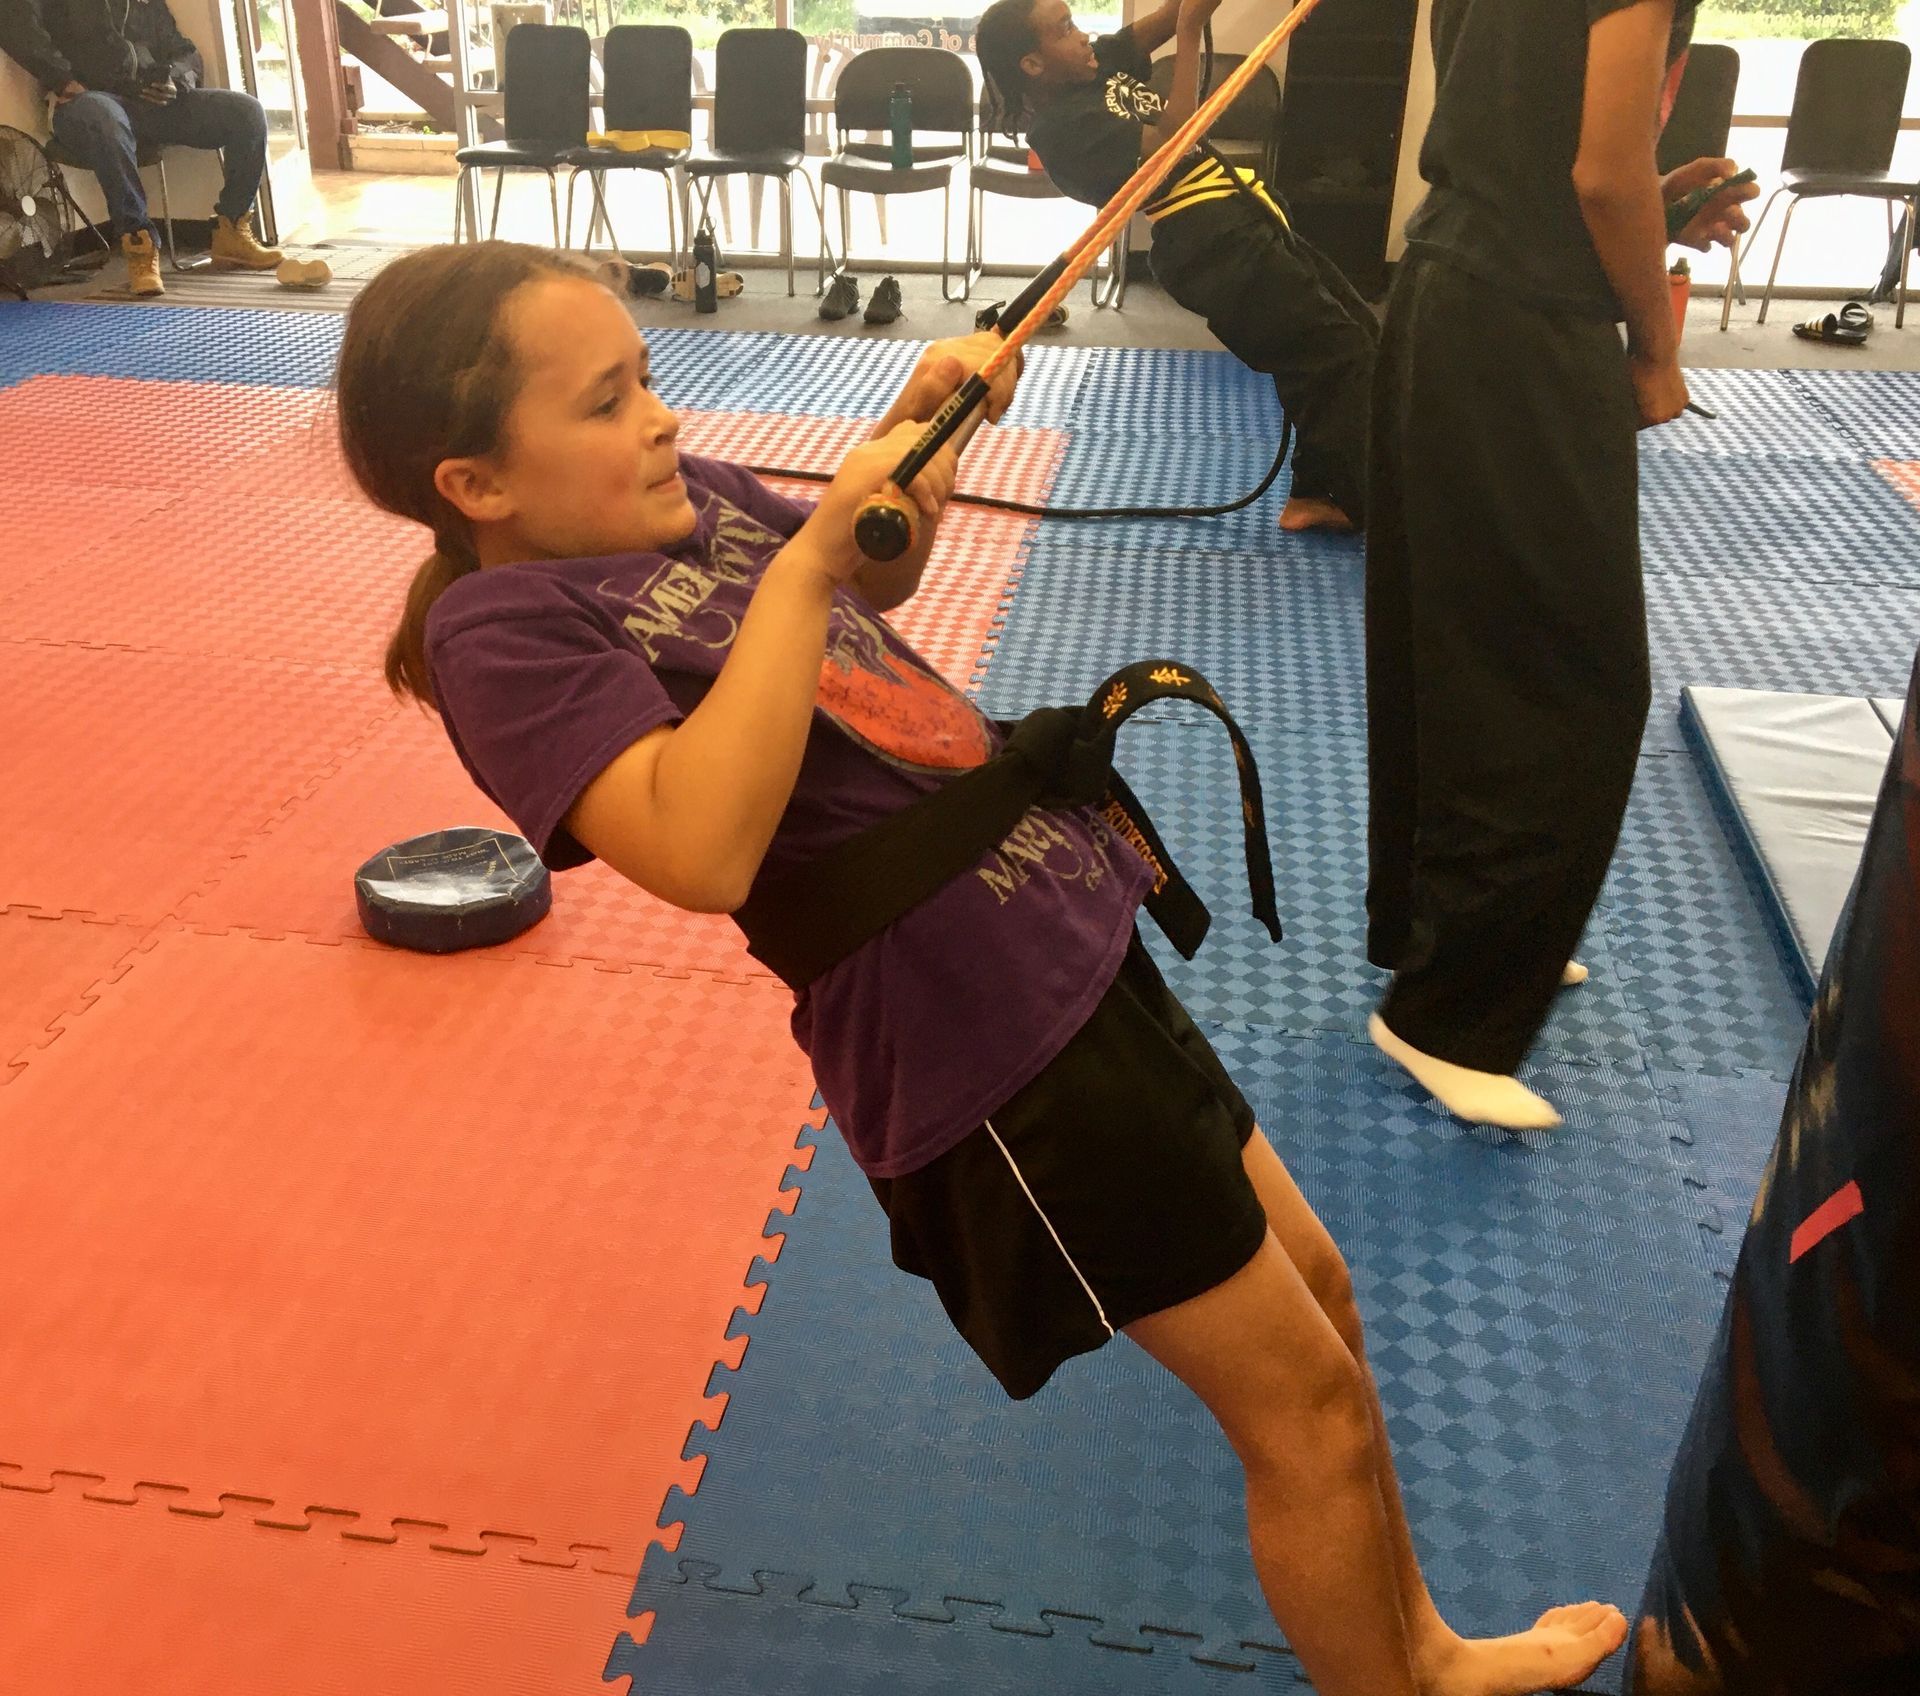 A girl doing circuit training - holding a rope and keeping balance